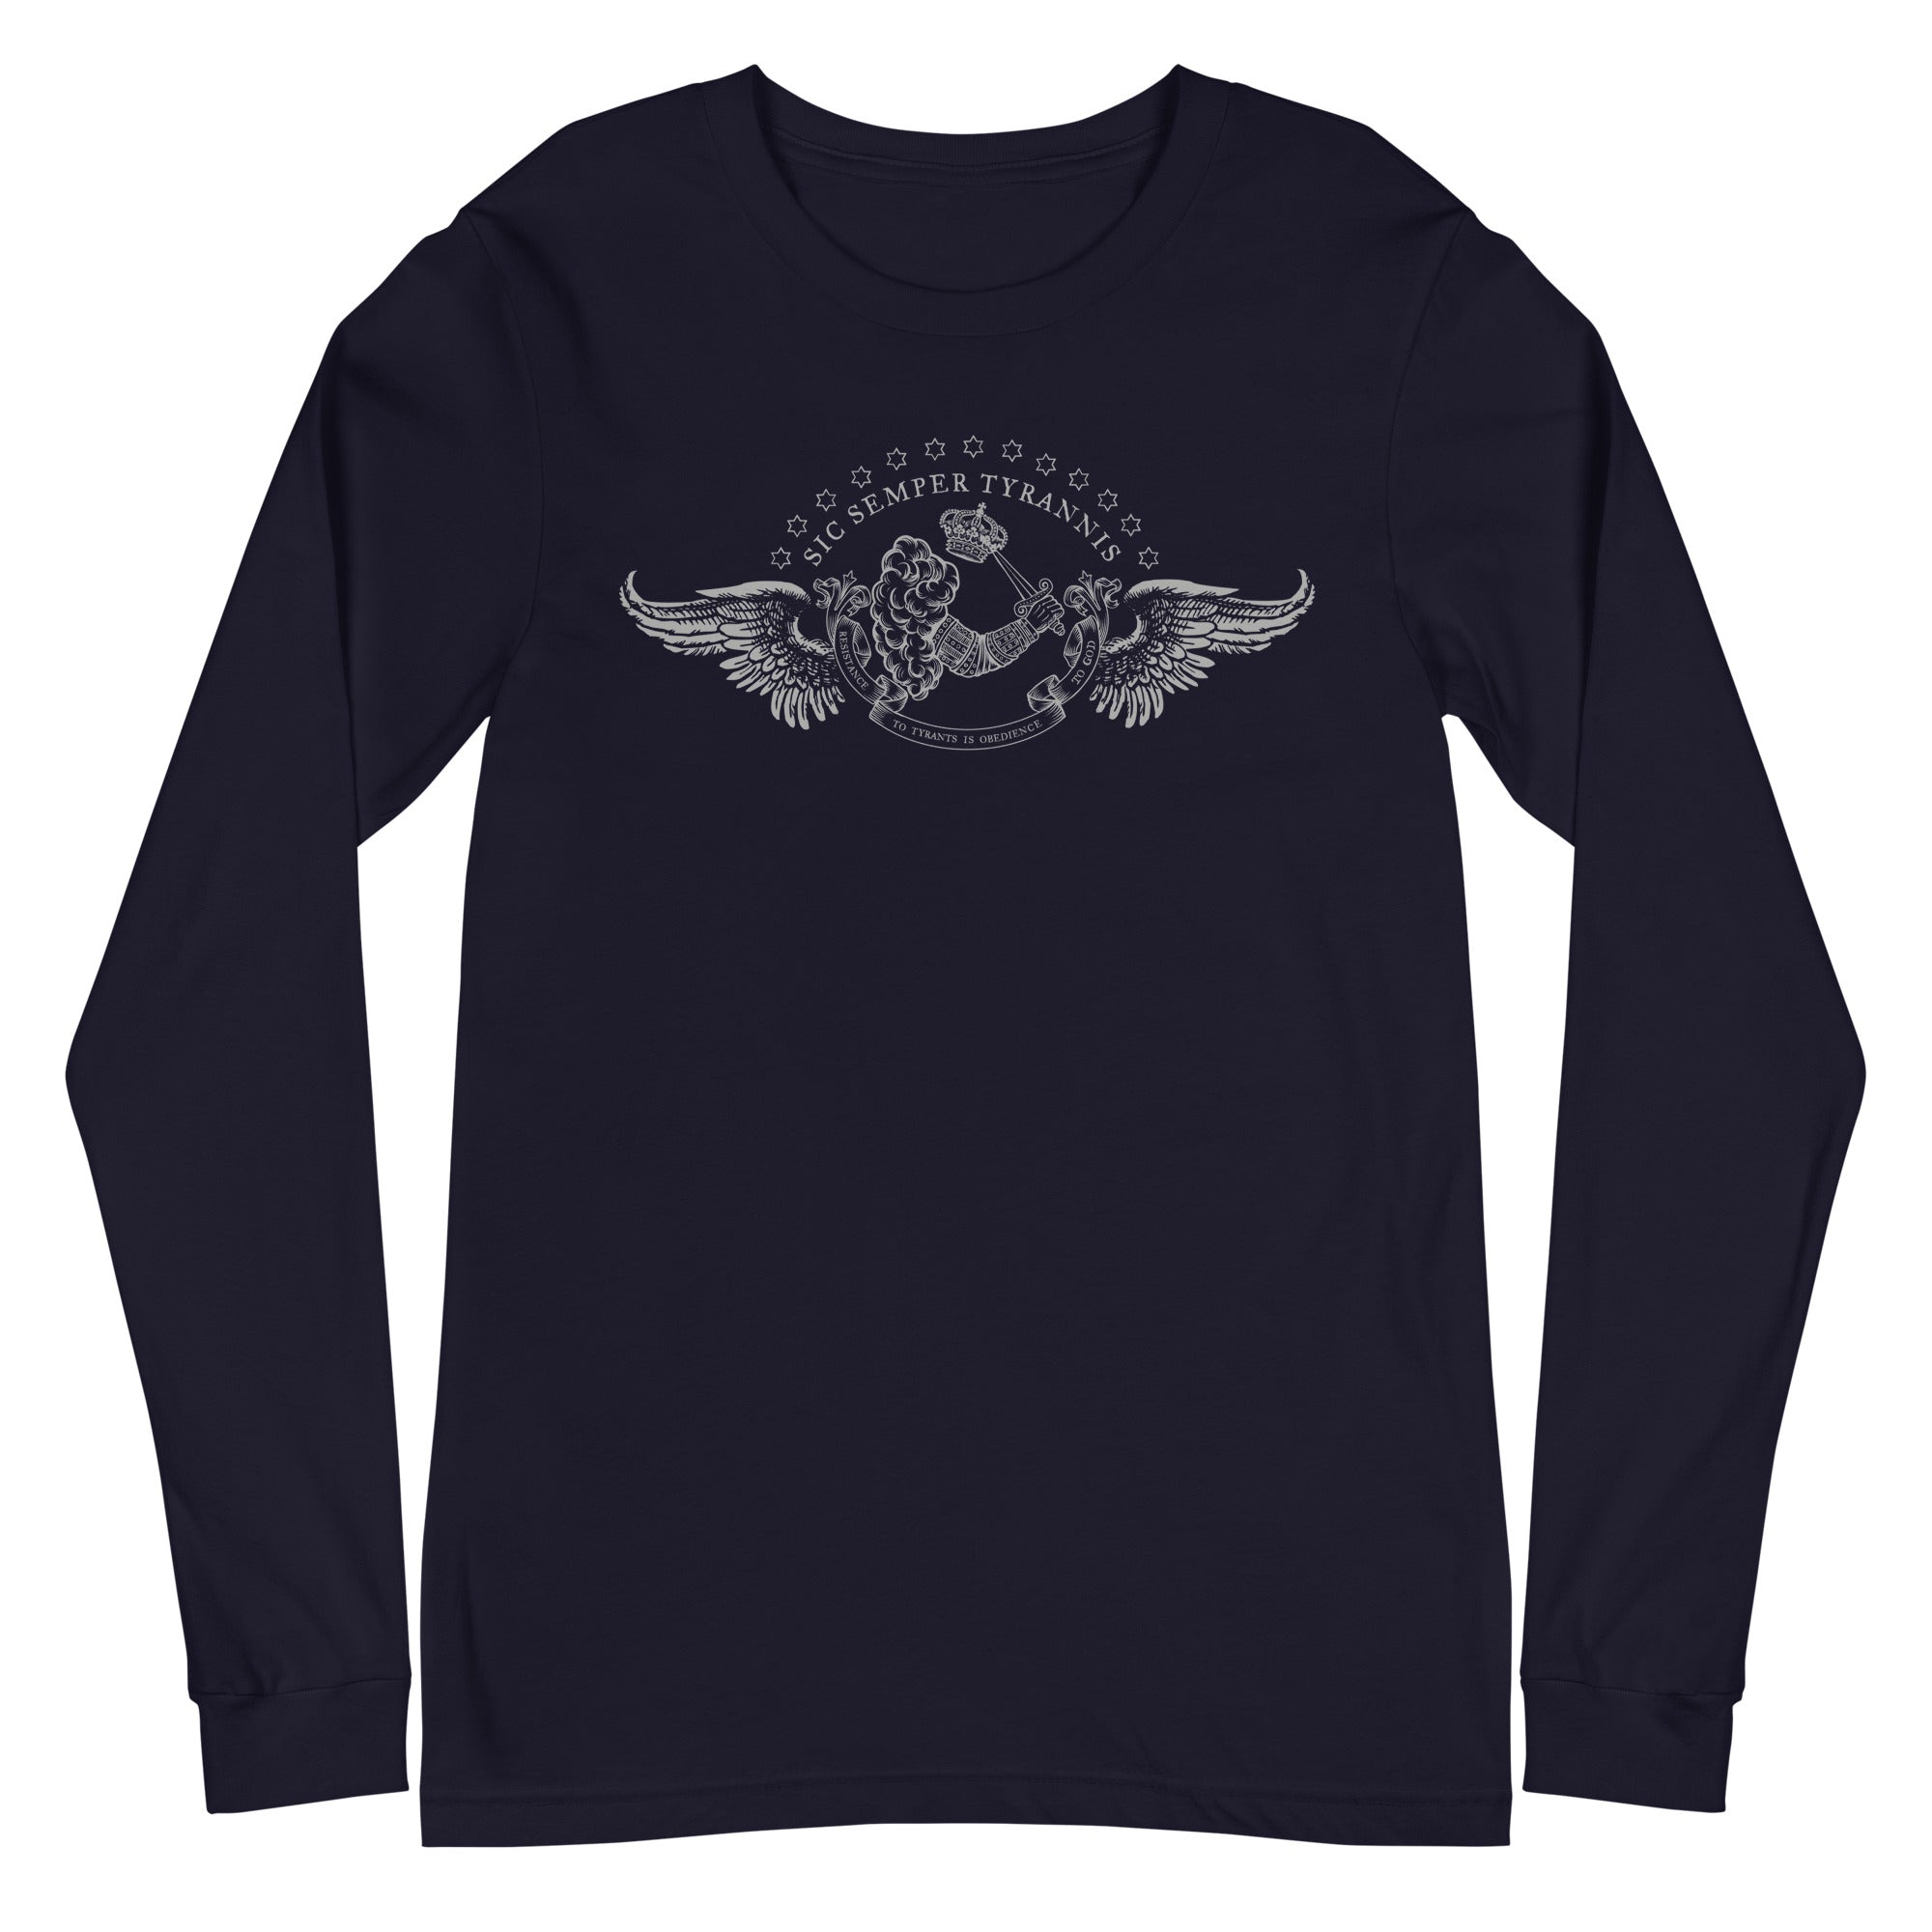 Sic Semper Tyrannis Obedience to God Long Sleeve Tee